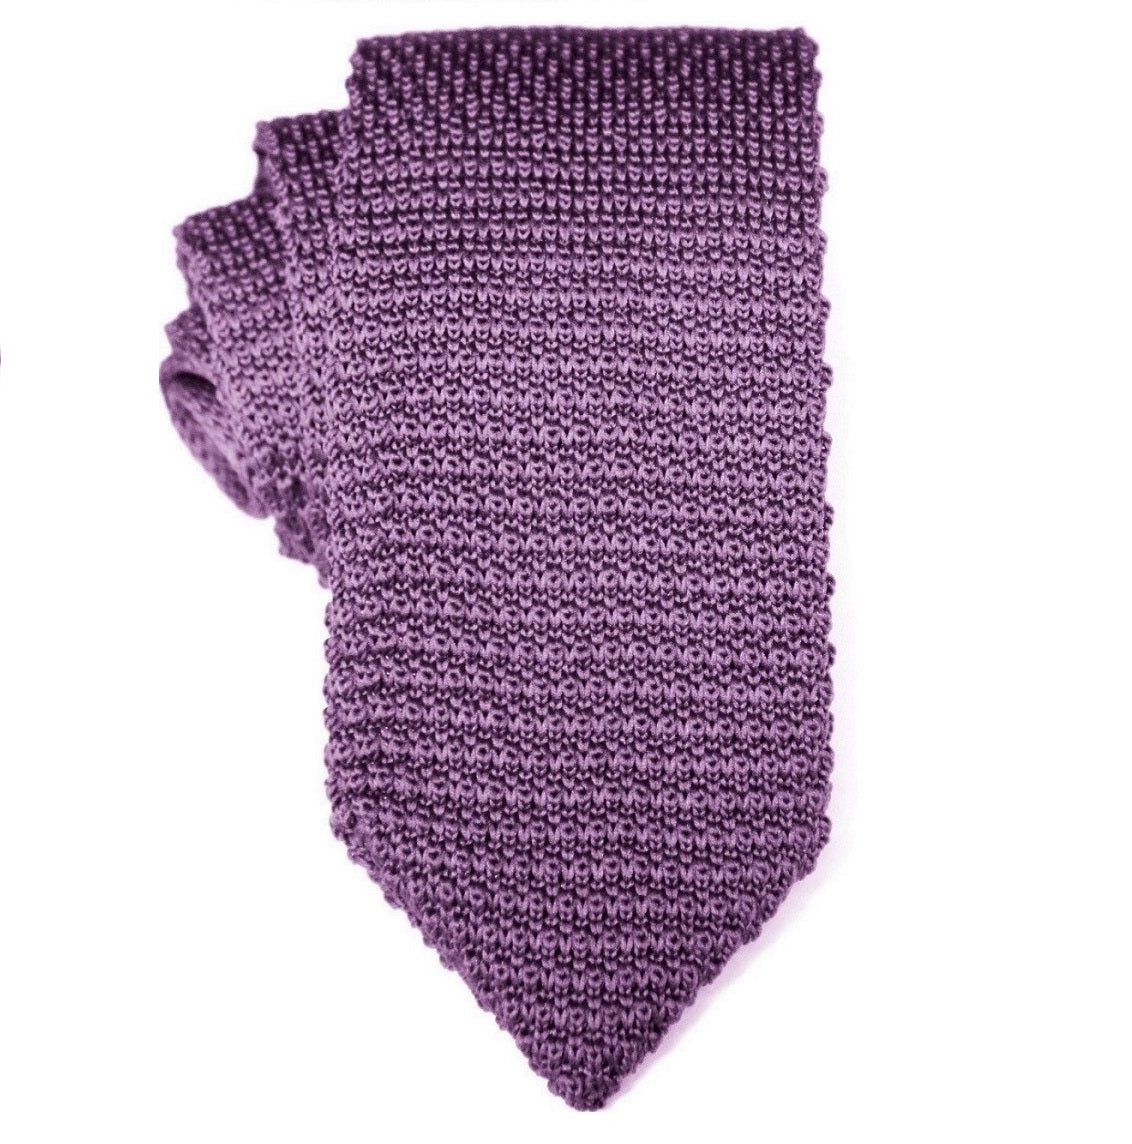 A rolled-up Classic Purple Knit Tie with modern flair on a white background.